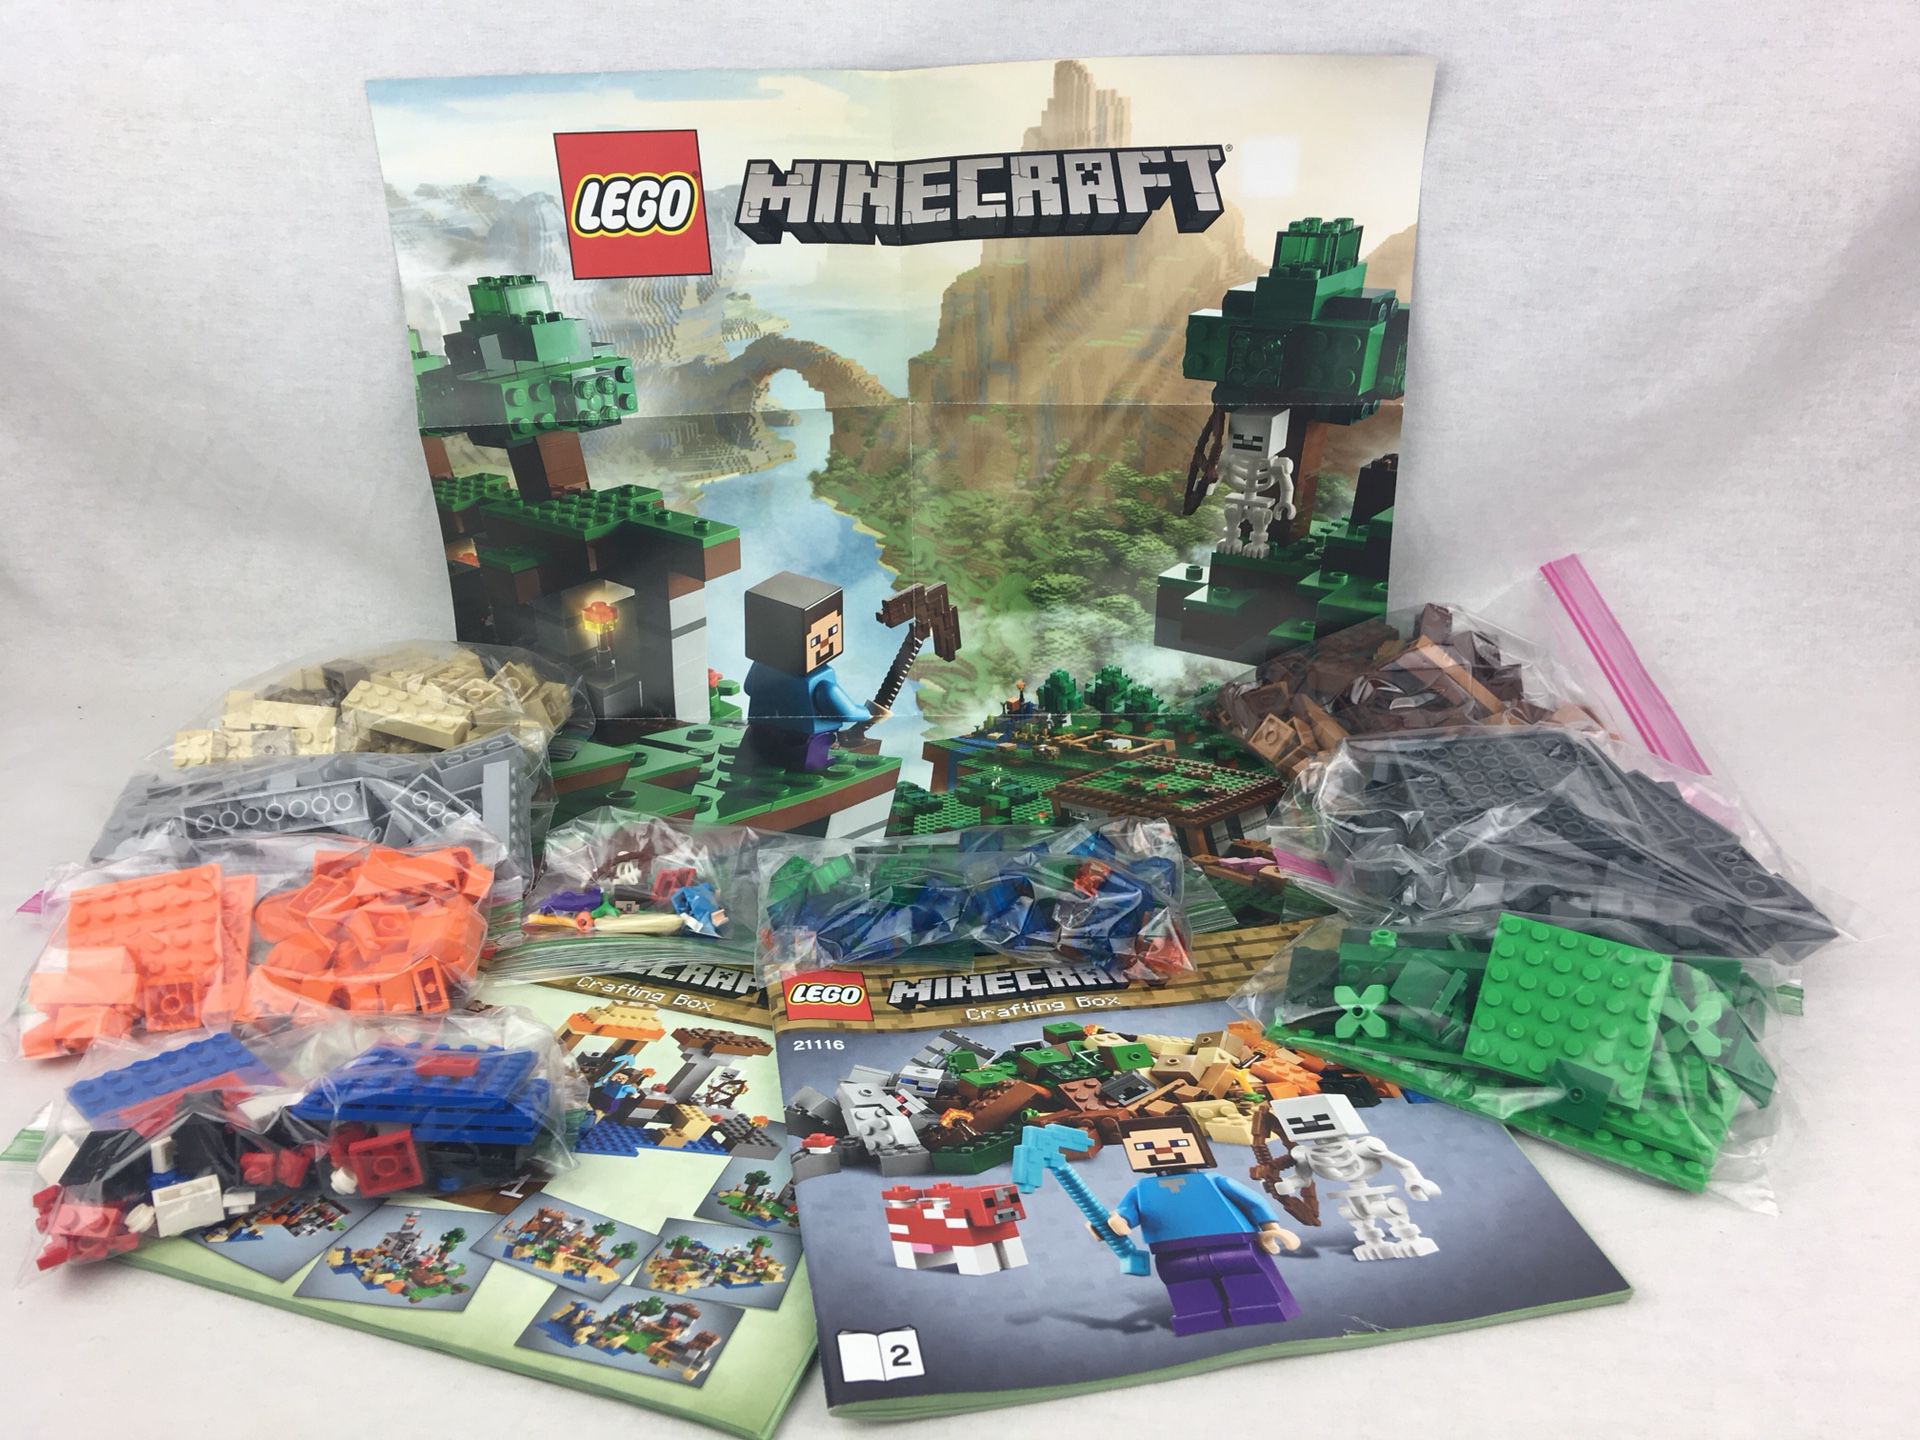 skitse knap Habubu Lego 21116 Minecraft Crafting Box 100% Complete Manuals & Poster Included  for Sale in Lake Elsinore, CA - OfferUp